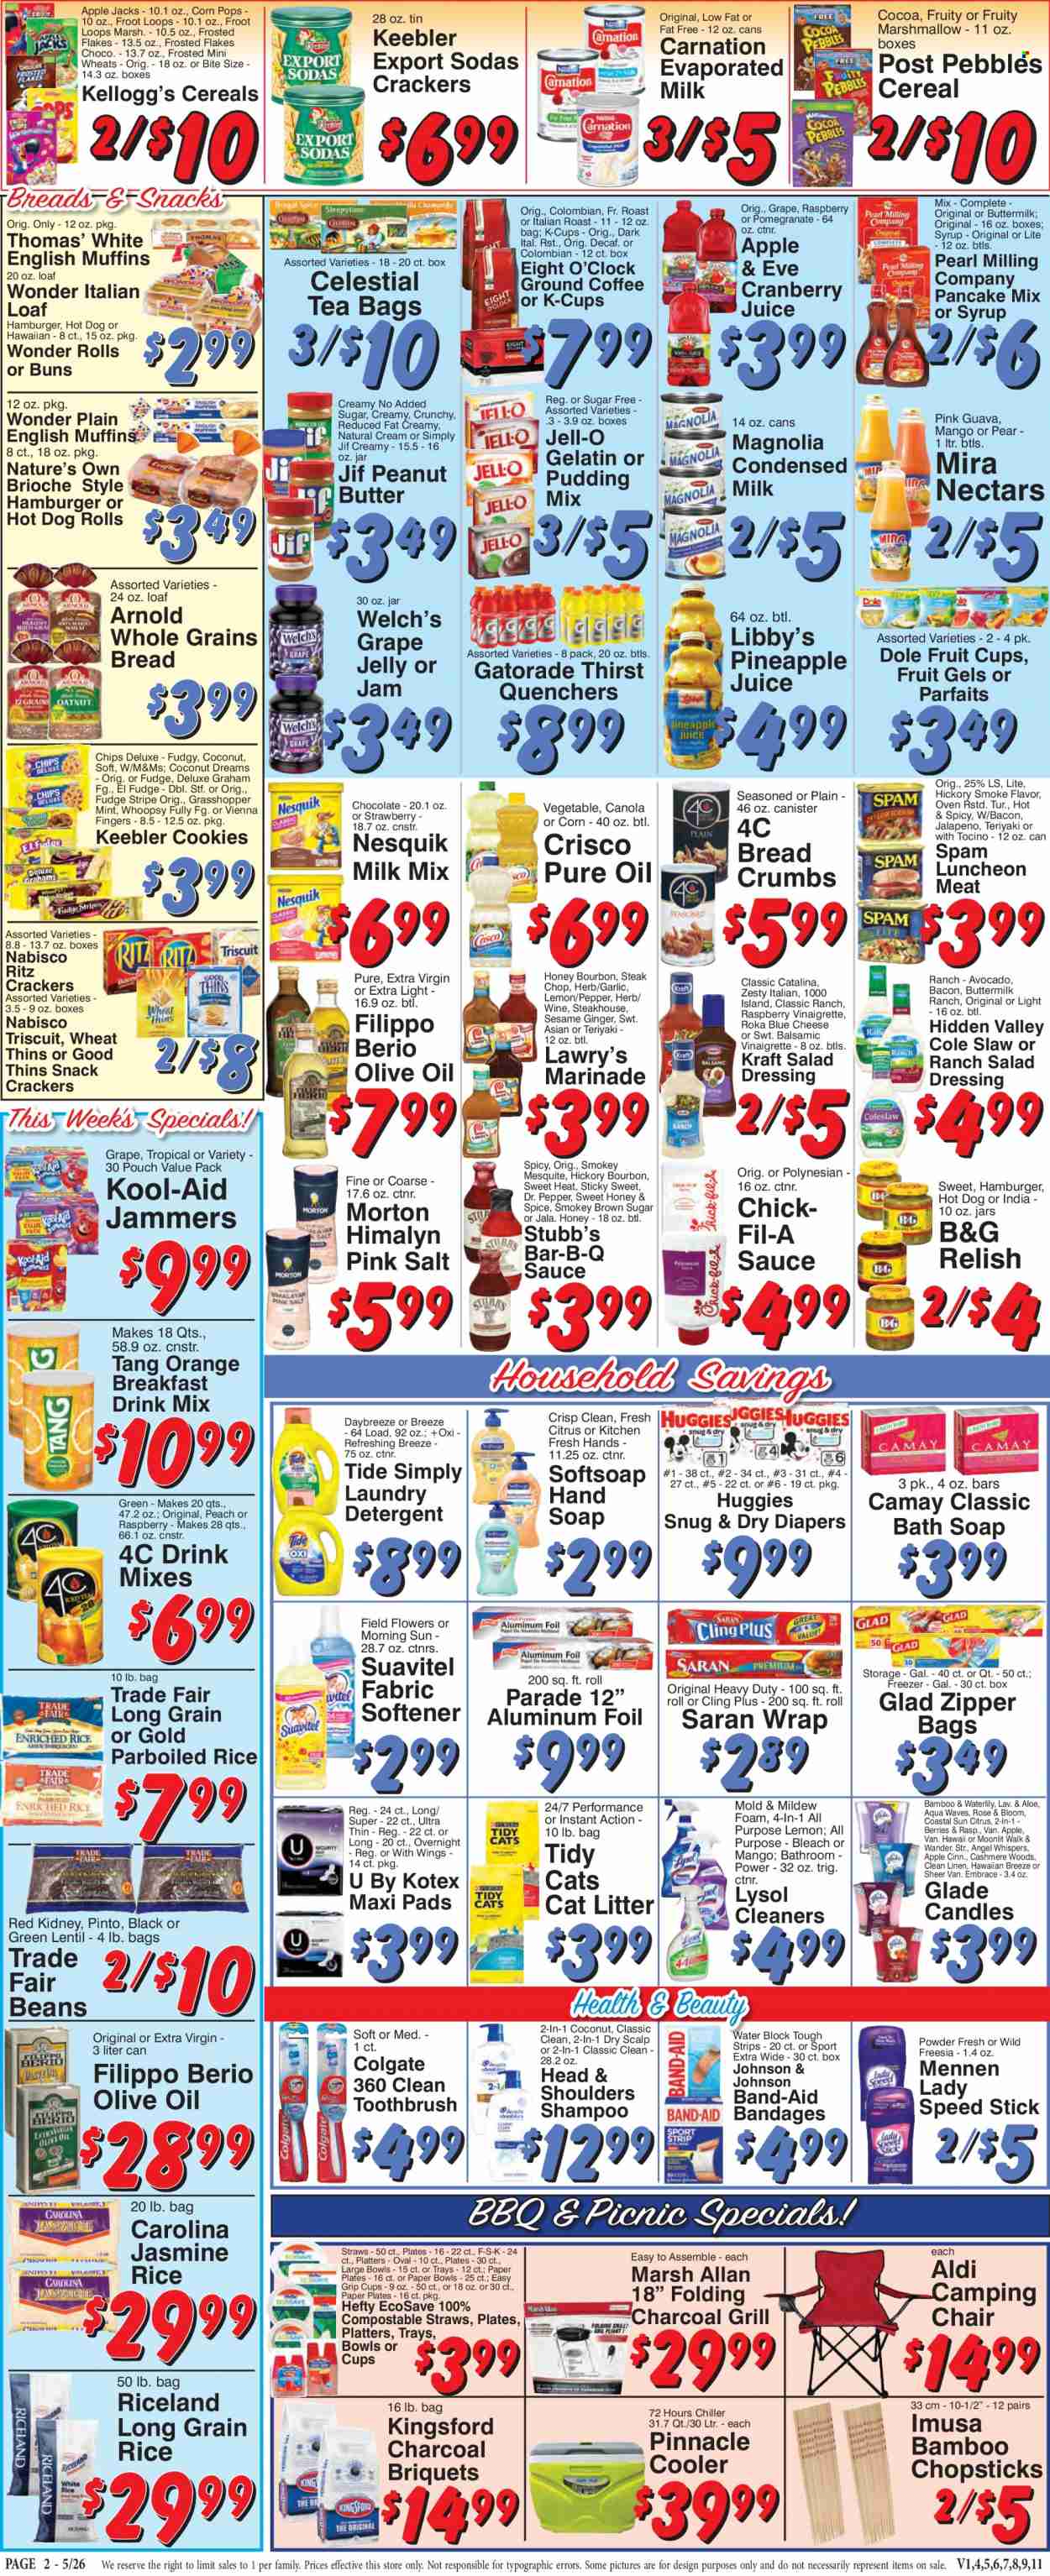 thumbnail - Trade Fair Supermarket Flyer - 05/26/2023 - 06/01/2023 - Sales products - english muffins, hot dog rolls, buns, brioche, breadcrumbs, pancake mix, garlic, ginger, Dole, jalapeño, guava, pineapple, pears, oranges, fruit cup, Welch's, hamburger, sauce, Kraft®, Kingsford, roast, bacon, snack, Spam, lunch meat, pudding, Nesquik, buttermilk, evaporated milk, condensed milk, strips, cookies, fudge, marshmallows, vienna fingers, chocolate, jelly, crackers, Kellogg's, Keebler, RITZ, Nabisco, chips, Thins, cane sugar, cocoa, Crisco, Jell-O, cereals, Frosted Flakes, Corn Pops, rice, jasmine rice, parboiled rice, spice, salad dressing, vinaigrette dressing, dressing, marinade, extra virgin olive oil, olive oil, grape jelly, peanut butter, Jif, cranberry juice, pineapple juice, juice, Dr. Pepper, Gatorade, water, powder drink, tea bags, coffee, ground coffee, K-Cups, Eight O'Clock, alcohol, bourbon, steak, Huggies, nappies, Johnson's, detergent, bleach, Lysol, Tide, fabric softener, laundry detergent, Suavitel, shampoo, Softsoap, soap, Colgate, toothbrush, sanitary pads, Kotex, Head & Shoulders, Speed Stick. Page 2.